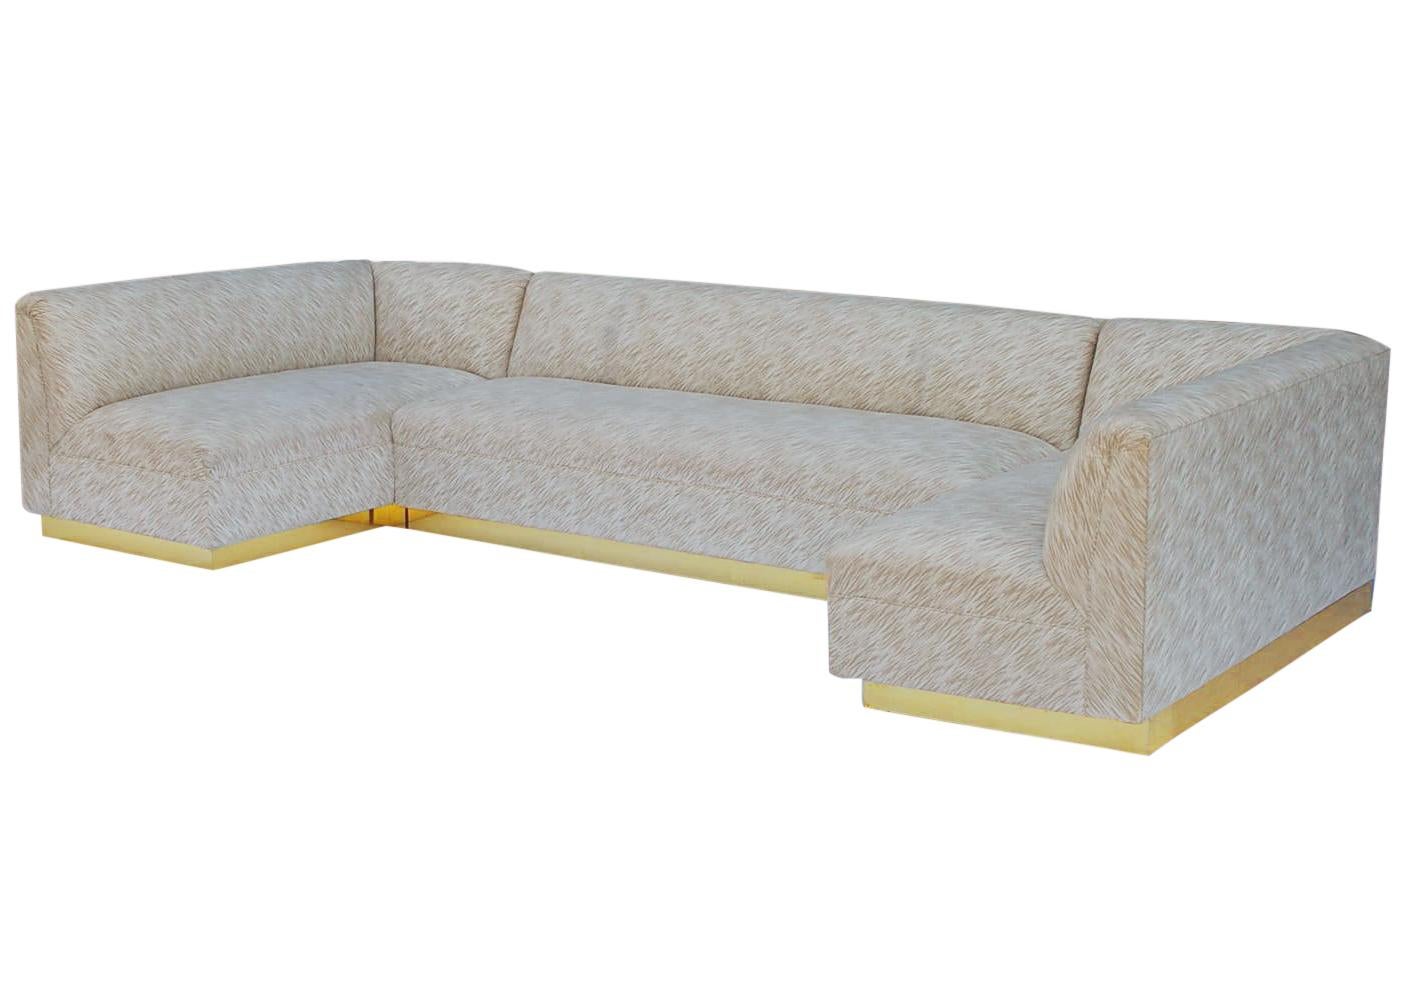 Late 20th Century Monumental Mid-Century Modern U-Shaped Pit Sectional Sofa with Brass Base